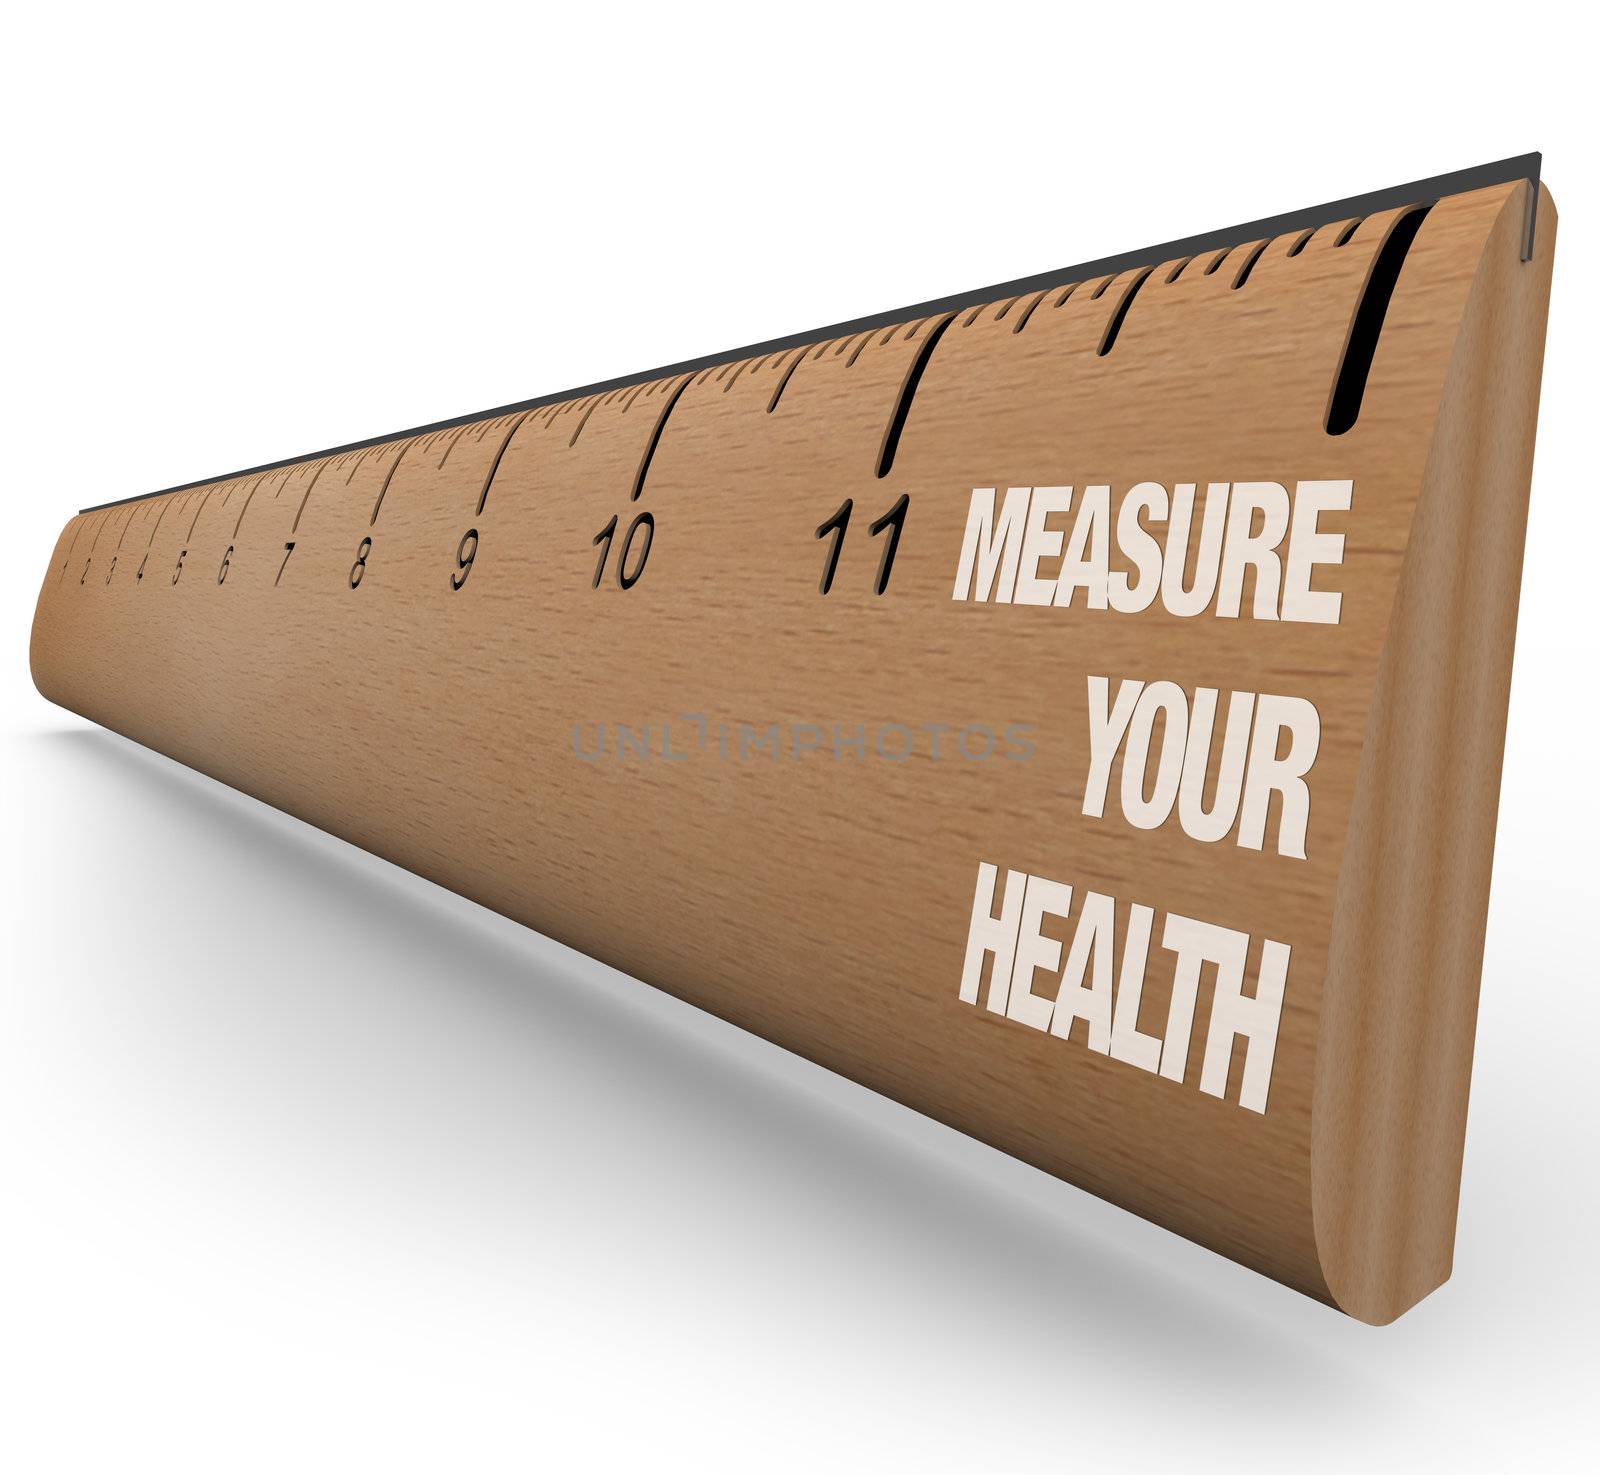 A wooden ruler with the words Measure Your Health, symbolizing the benefits of understanding your nutritional, dietary, exercise and overall health care goals and progress